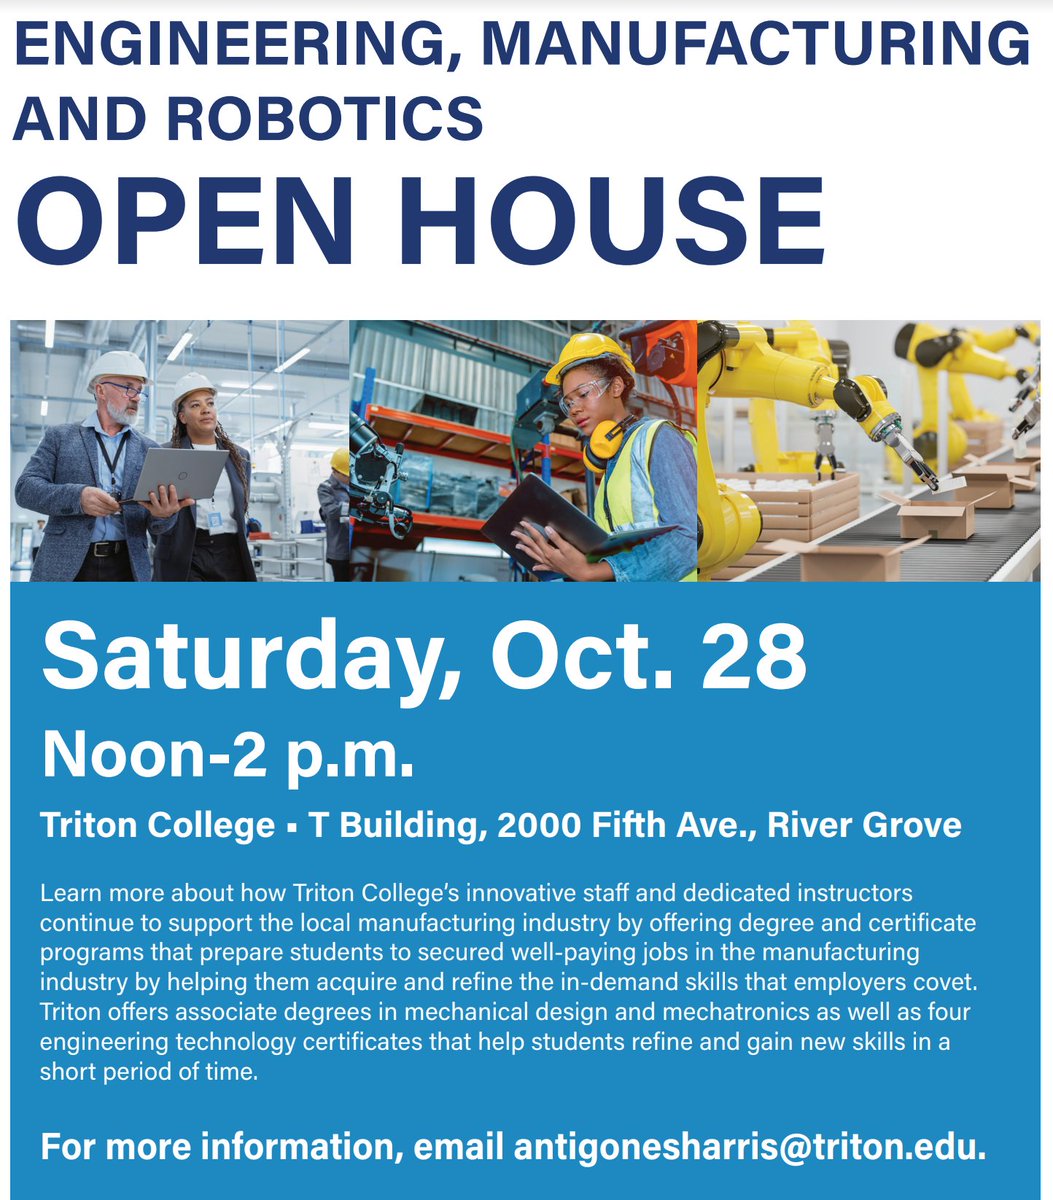 Interested in Engineering, manufacturing, or Robotics? Consider attending the @tritoncollege Open House on Saturday, October 28th! #leydenpride